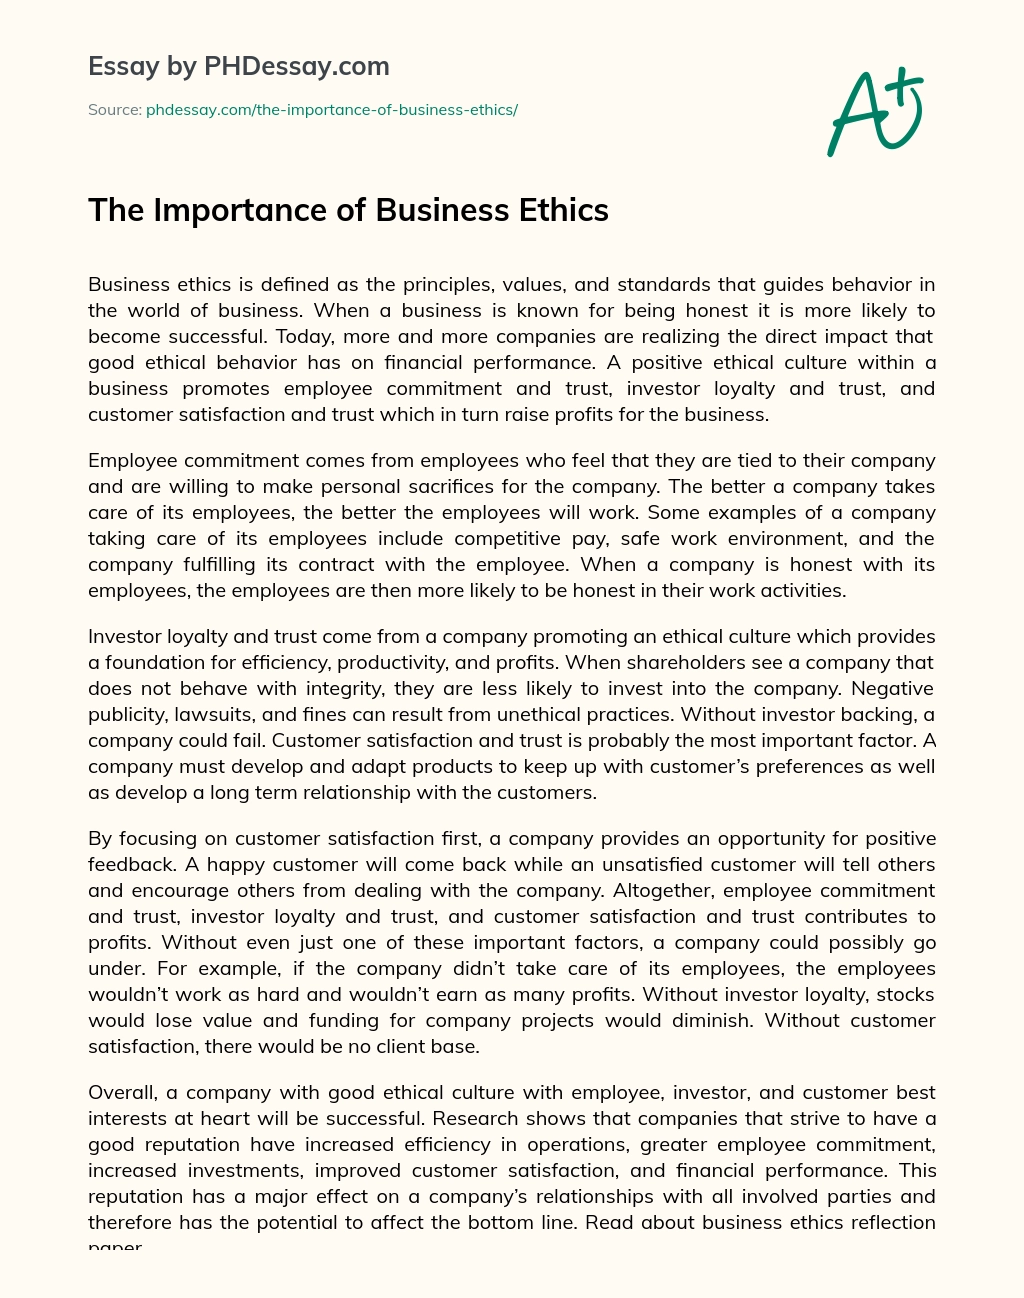 principles of business ethics essay